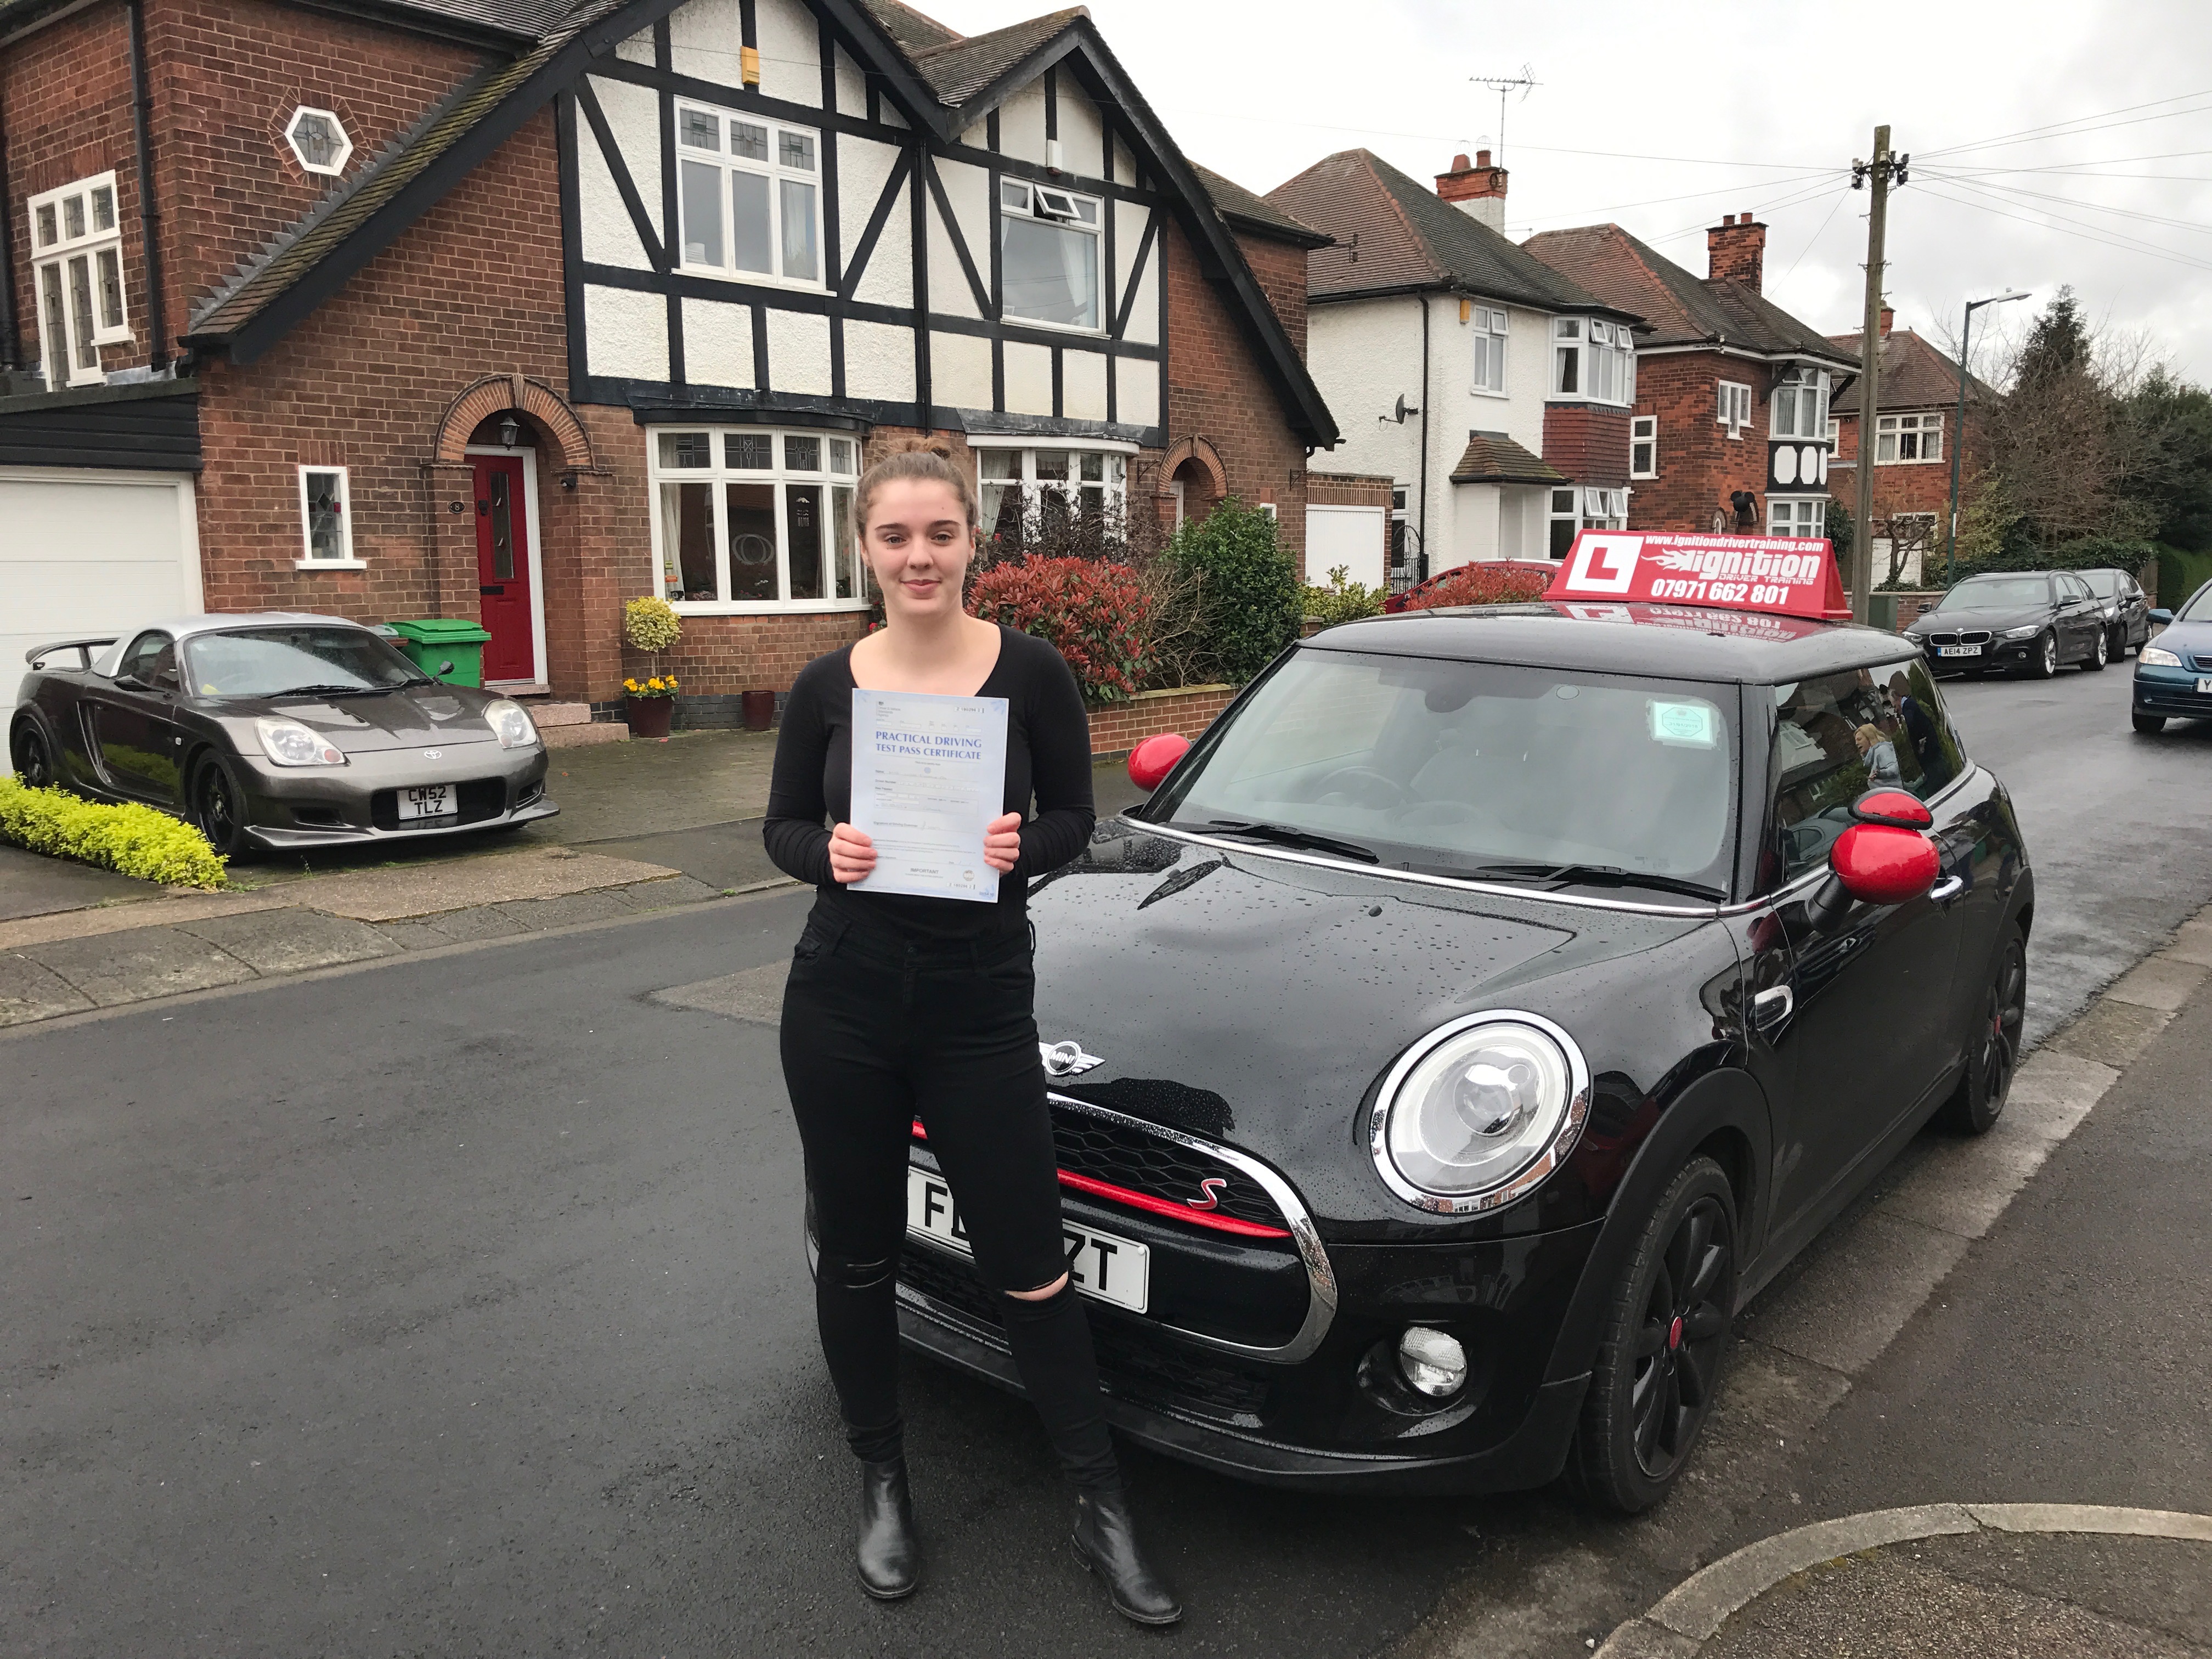 Well done Nicole on a great pass!